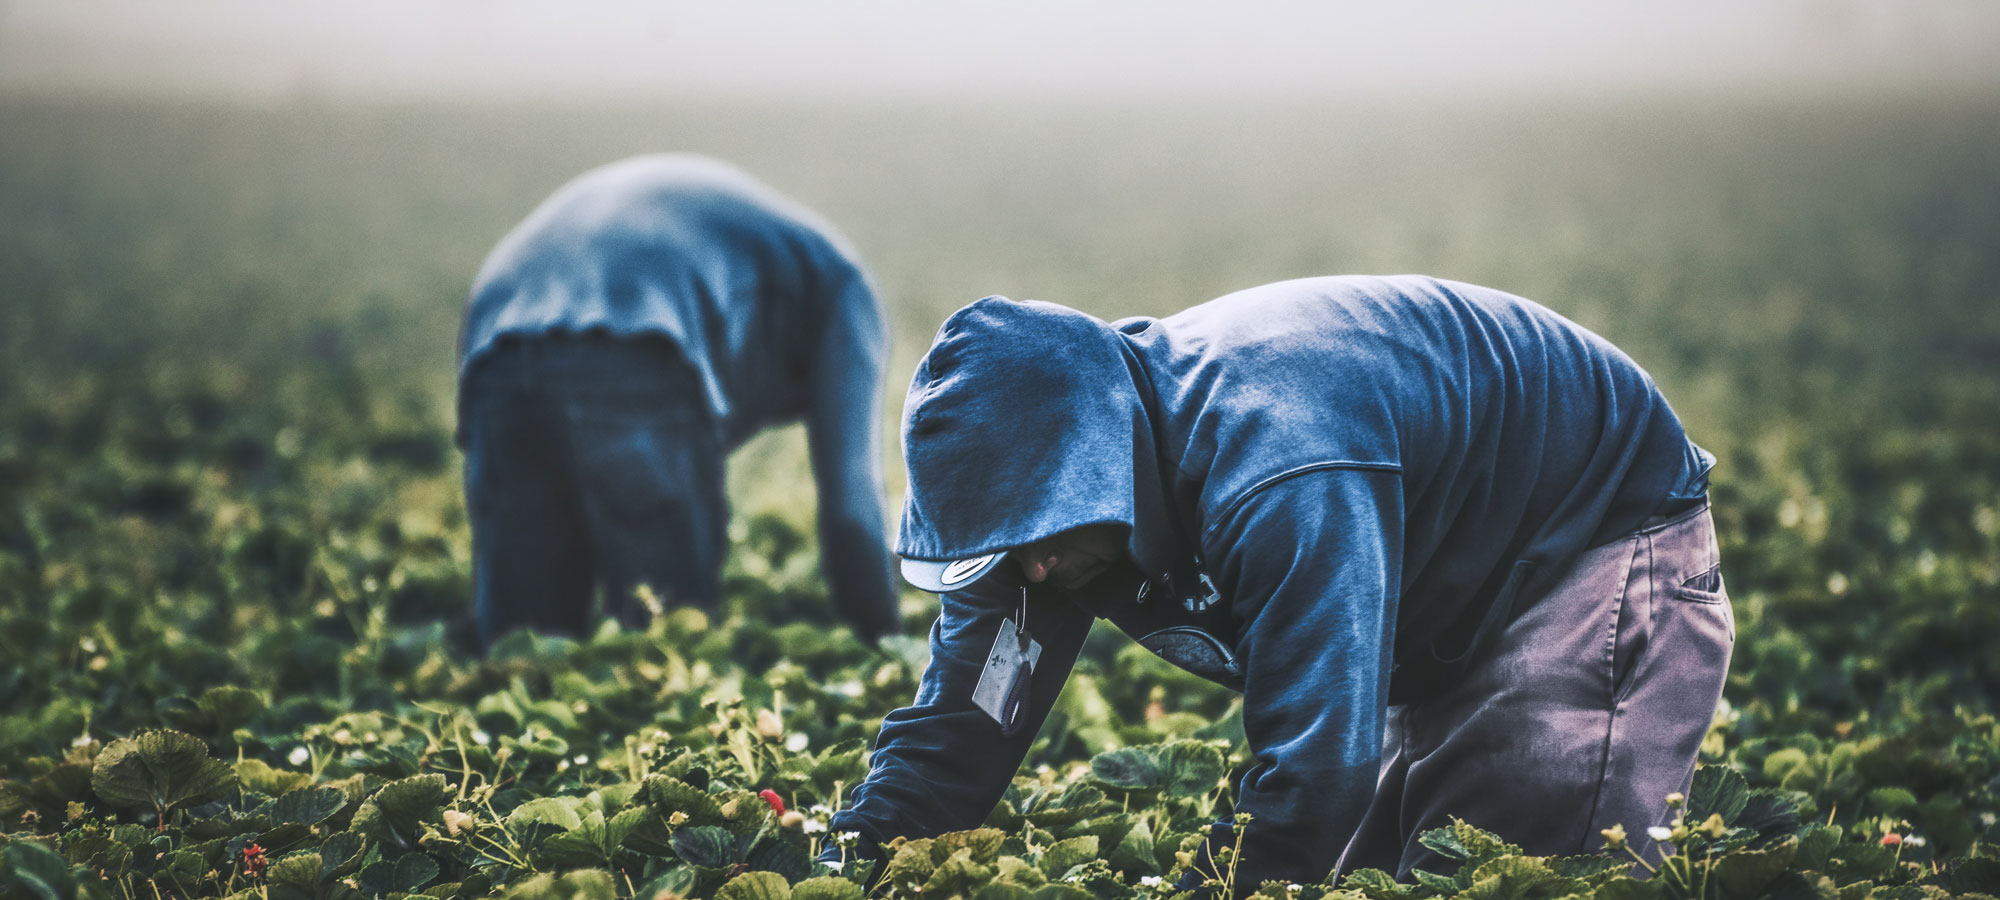 photo - Field Workers Strawberry Picking in California